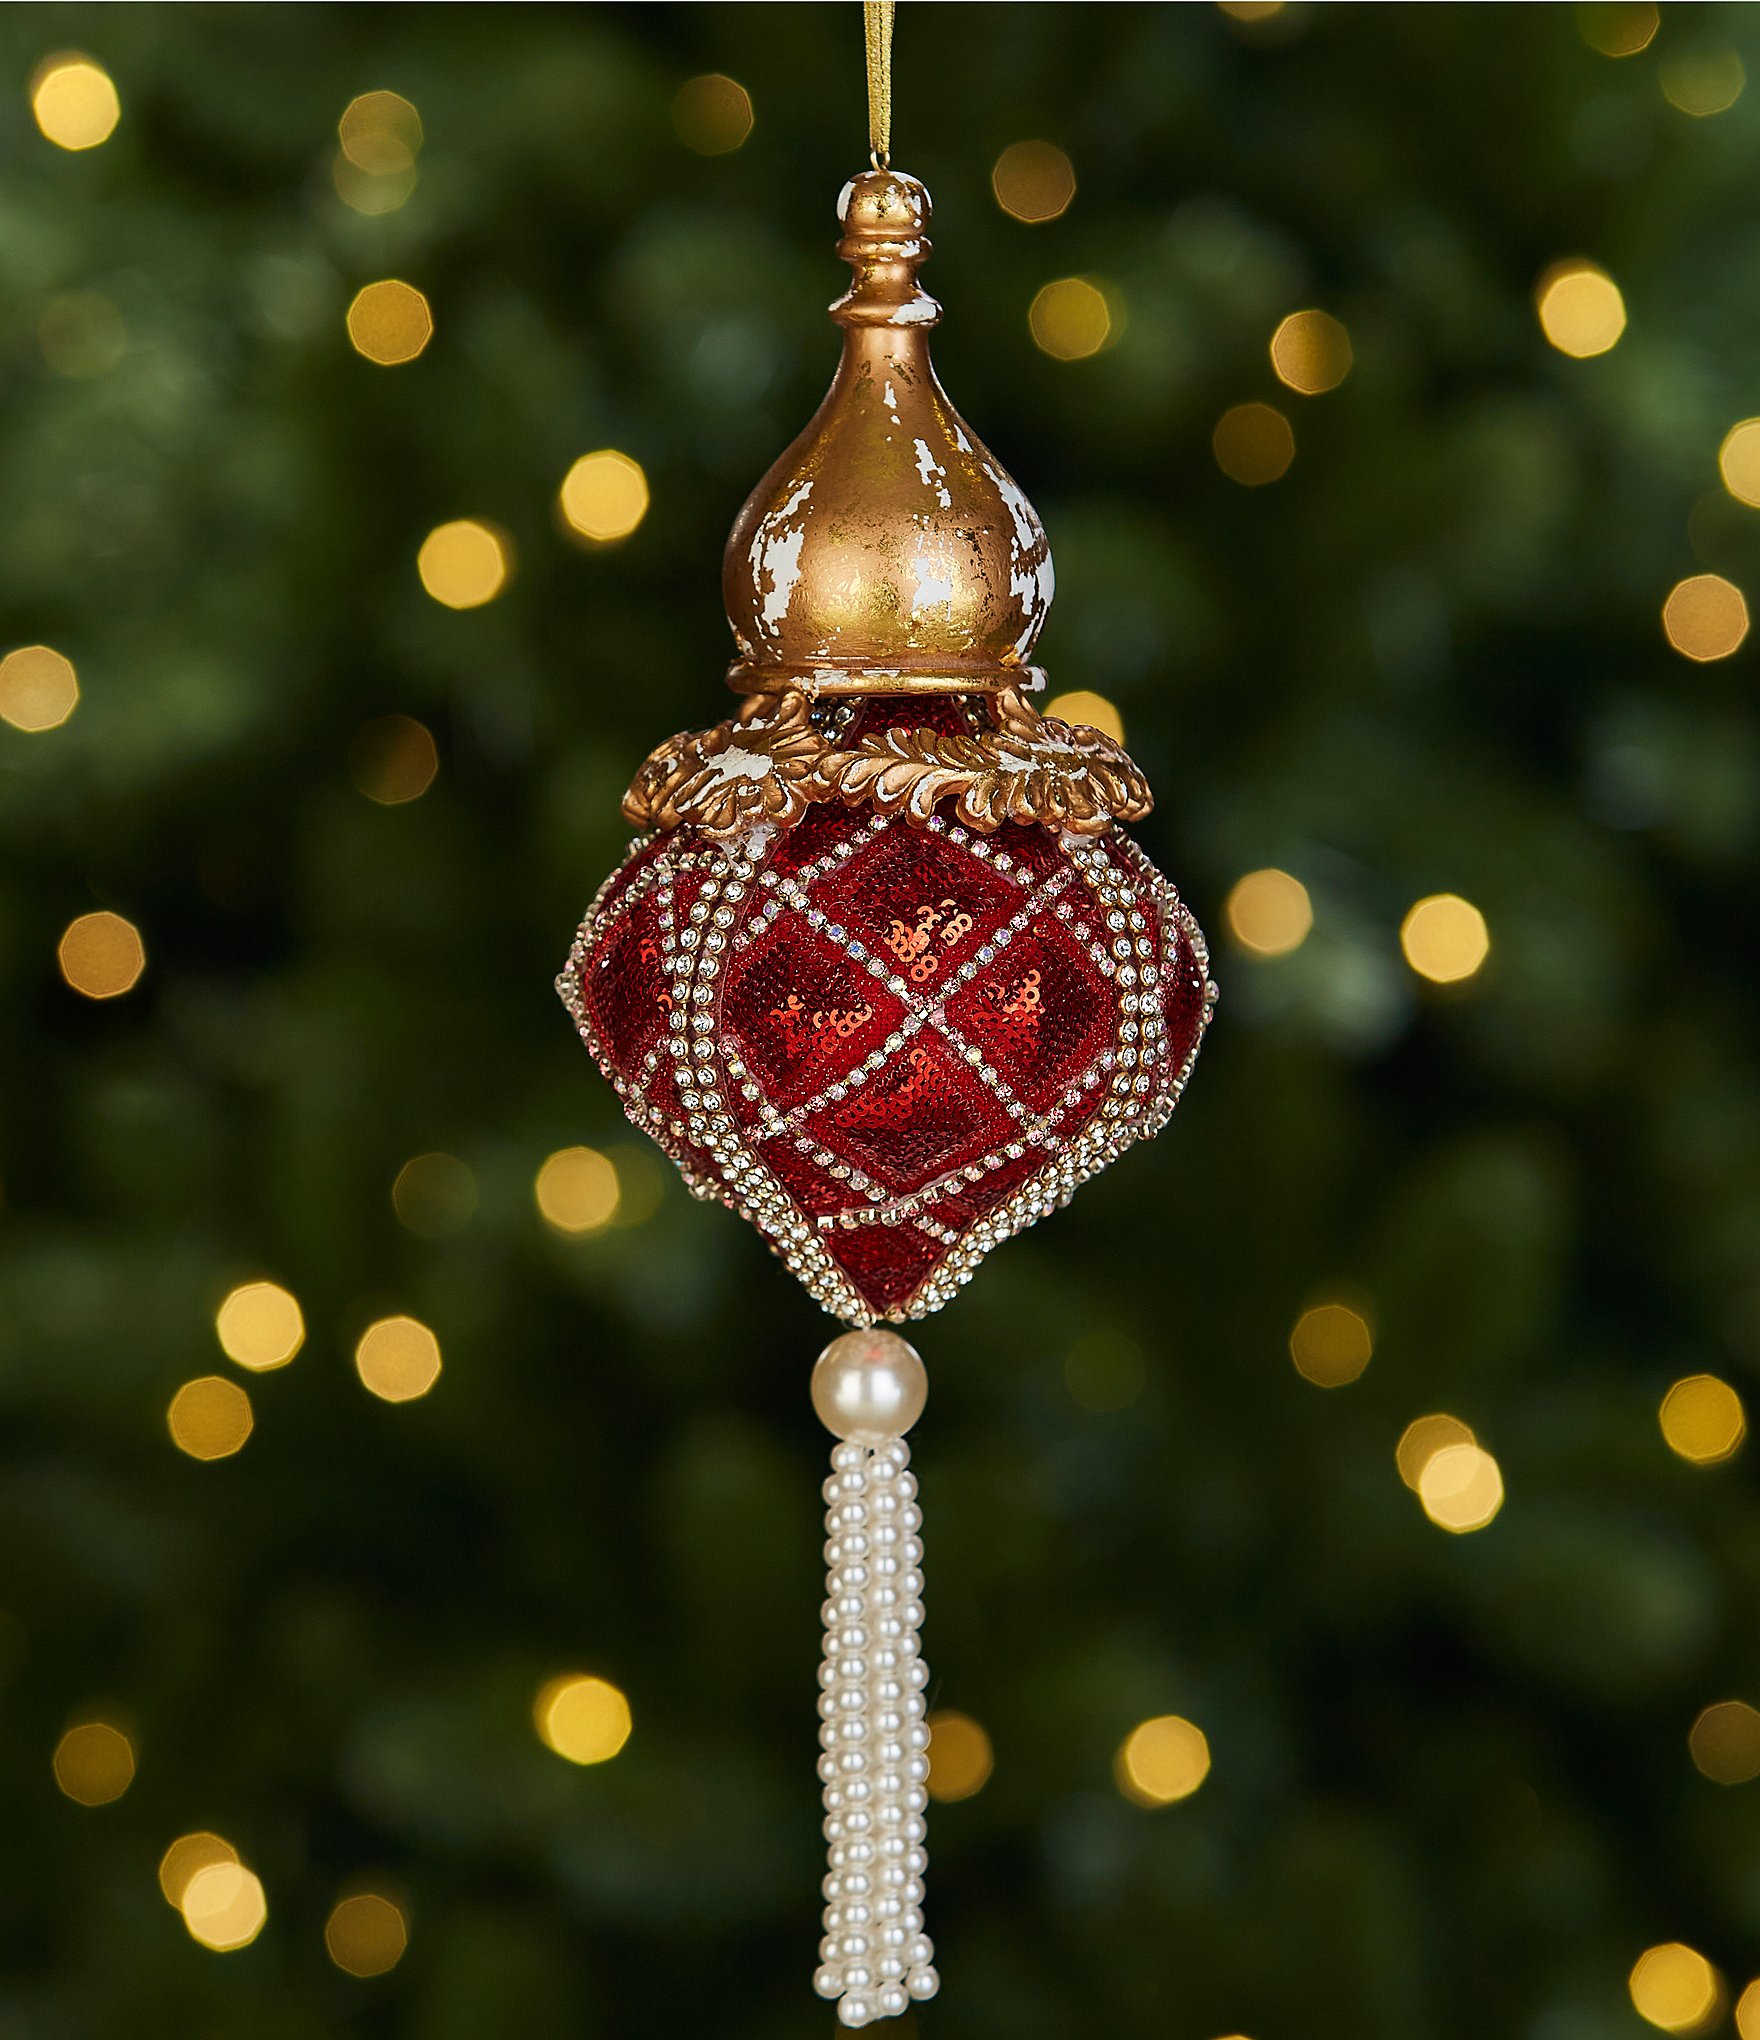 https://dimg.dillards.com/is/image/DillardsZoom/zoom/trimsetter-highland-holiday-collection-red-sequined-onion-shaped-with-pearl-tassel-ornament/00000000_zi_20390605.jpg